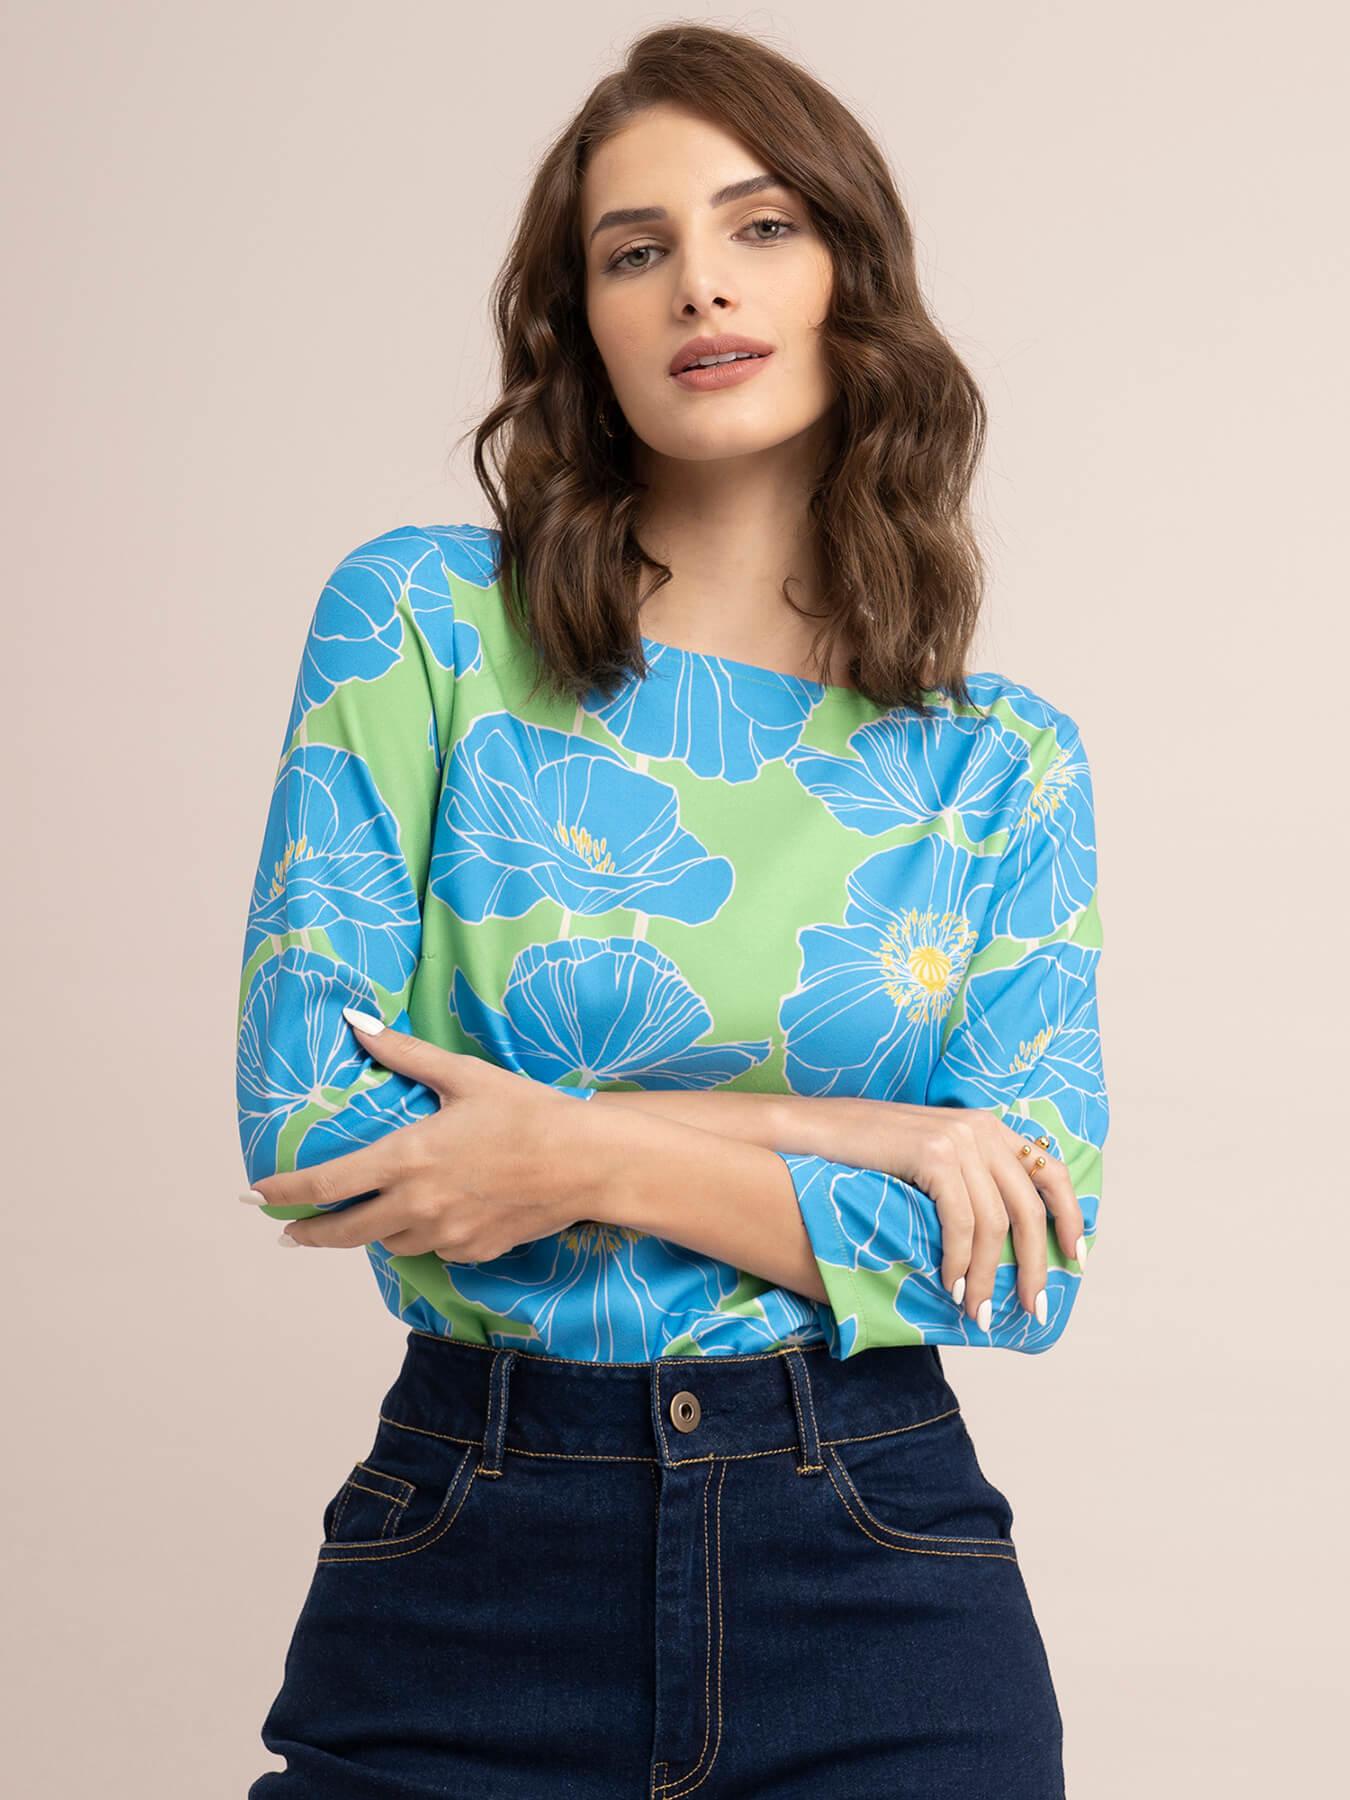 Floral Top - Blue and Green| Formal Tops